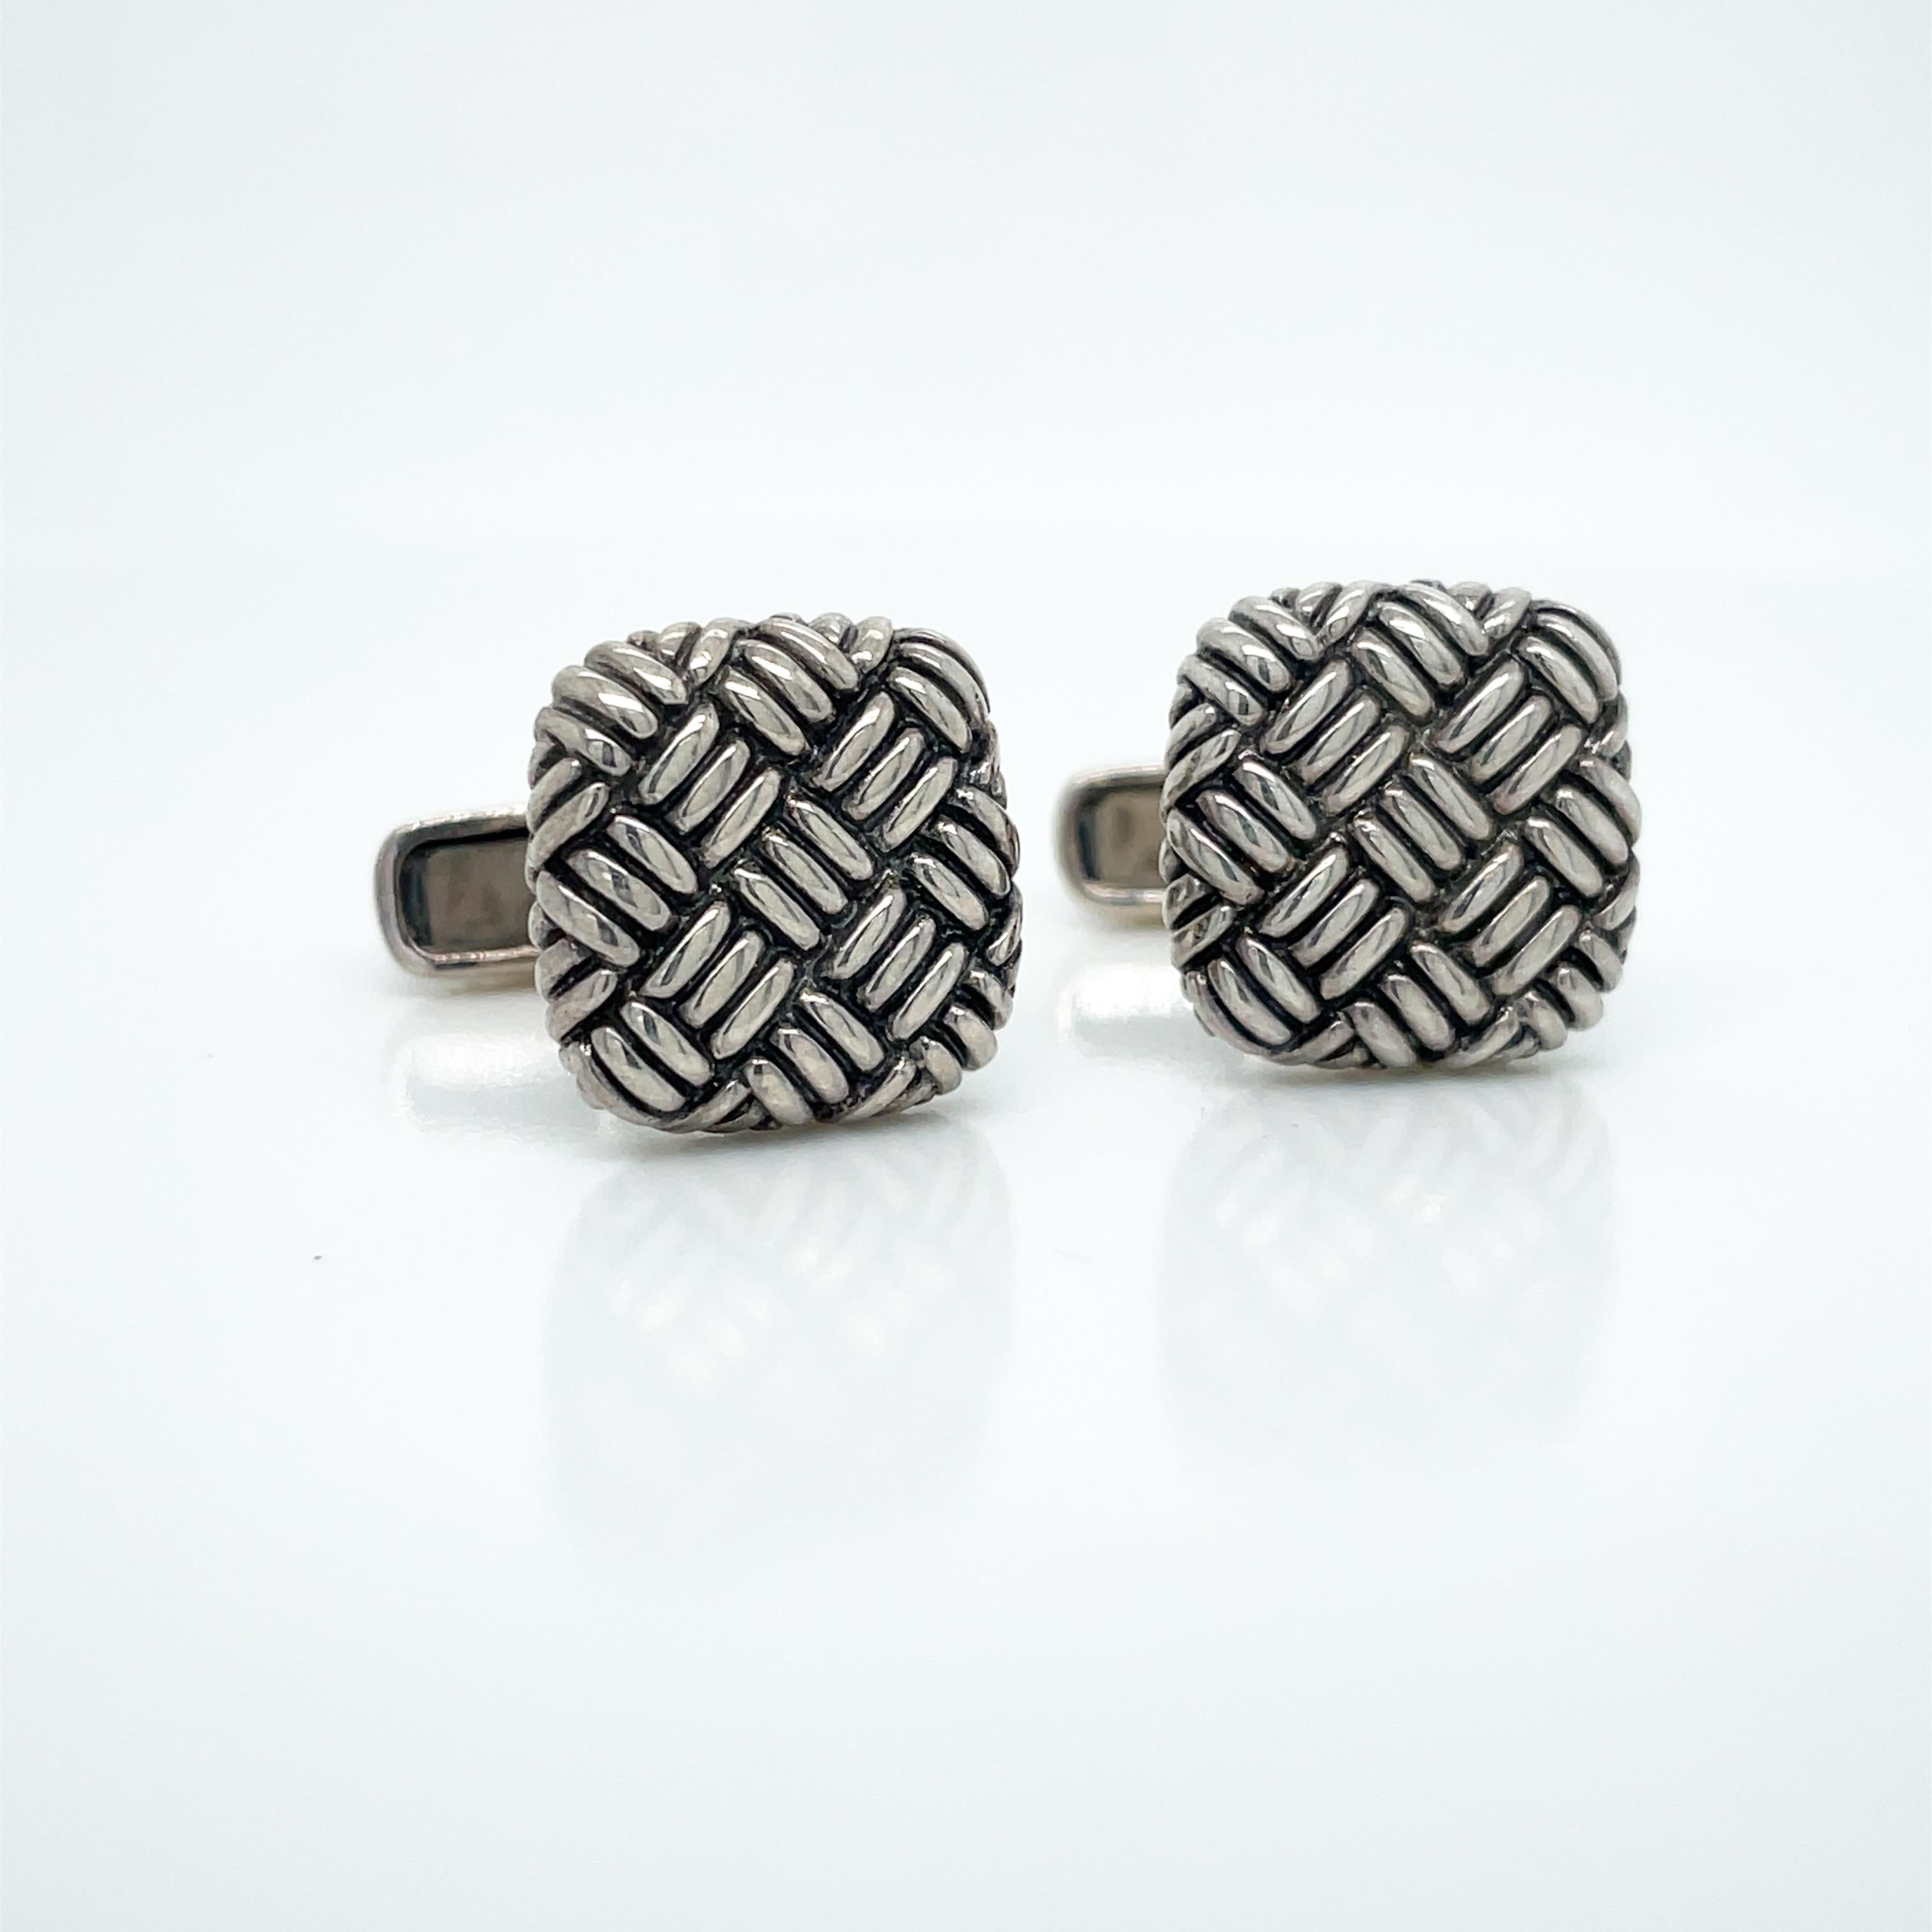 This is a classic pair of sterling silver cufflinks that feature a lovely basket weave design. This set of cufflinks would look excellent with any shirt for any occasion. These cufflinks are new and have never been worn. 

— — —

We offer a